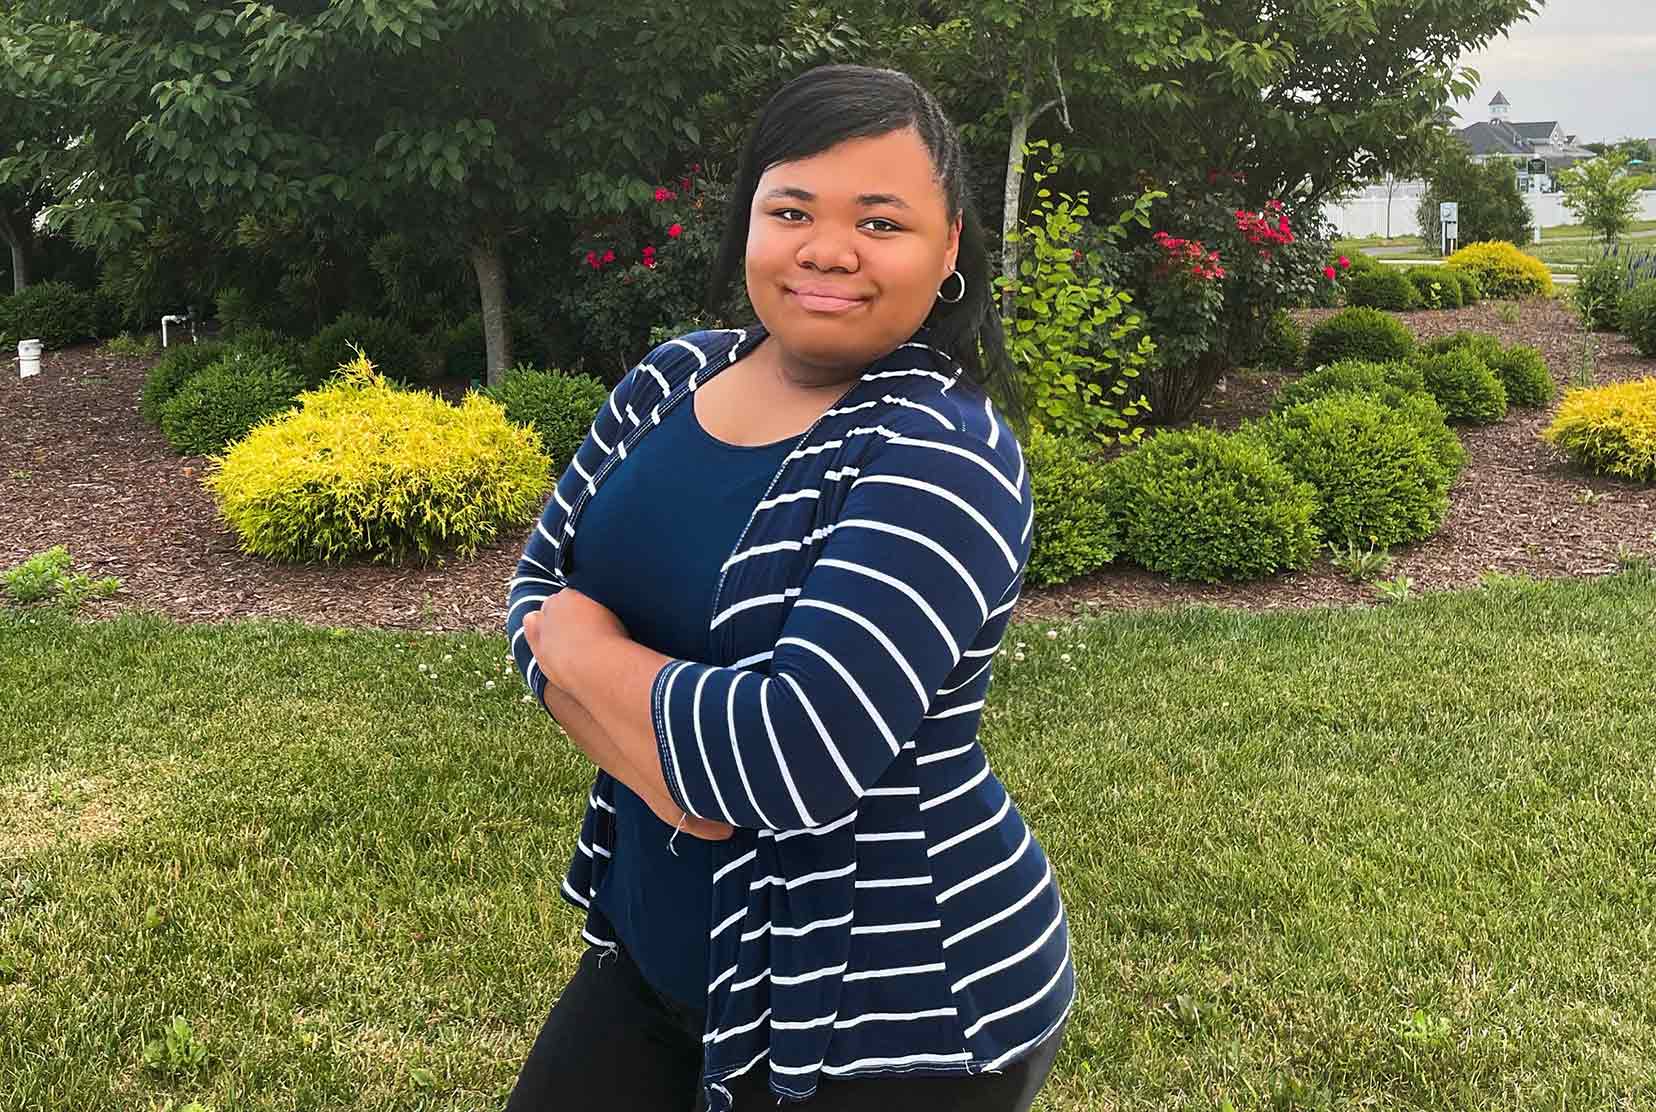 Destiny King, a graduate of the Early College High School and Delaware State University, is now planning to enroll in Del State's Chemistry Master's Degree Program. Her academic progression is a stellar example of the benefits of the ECHS.